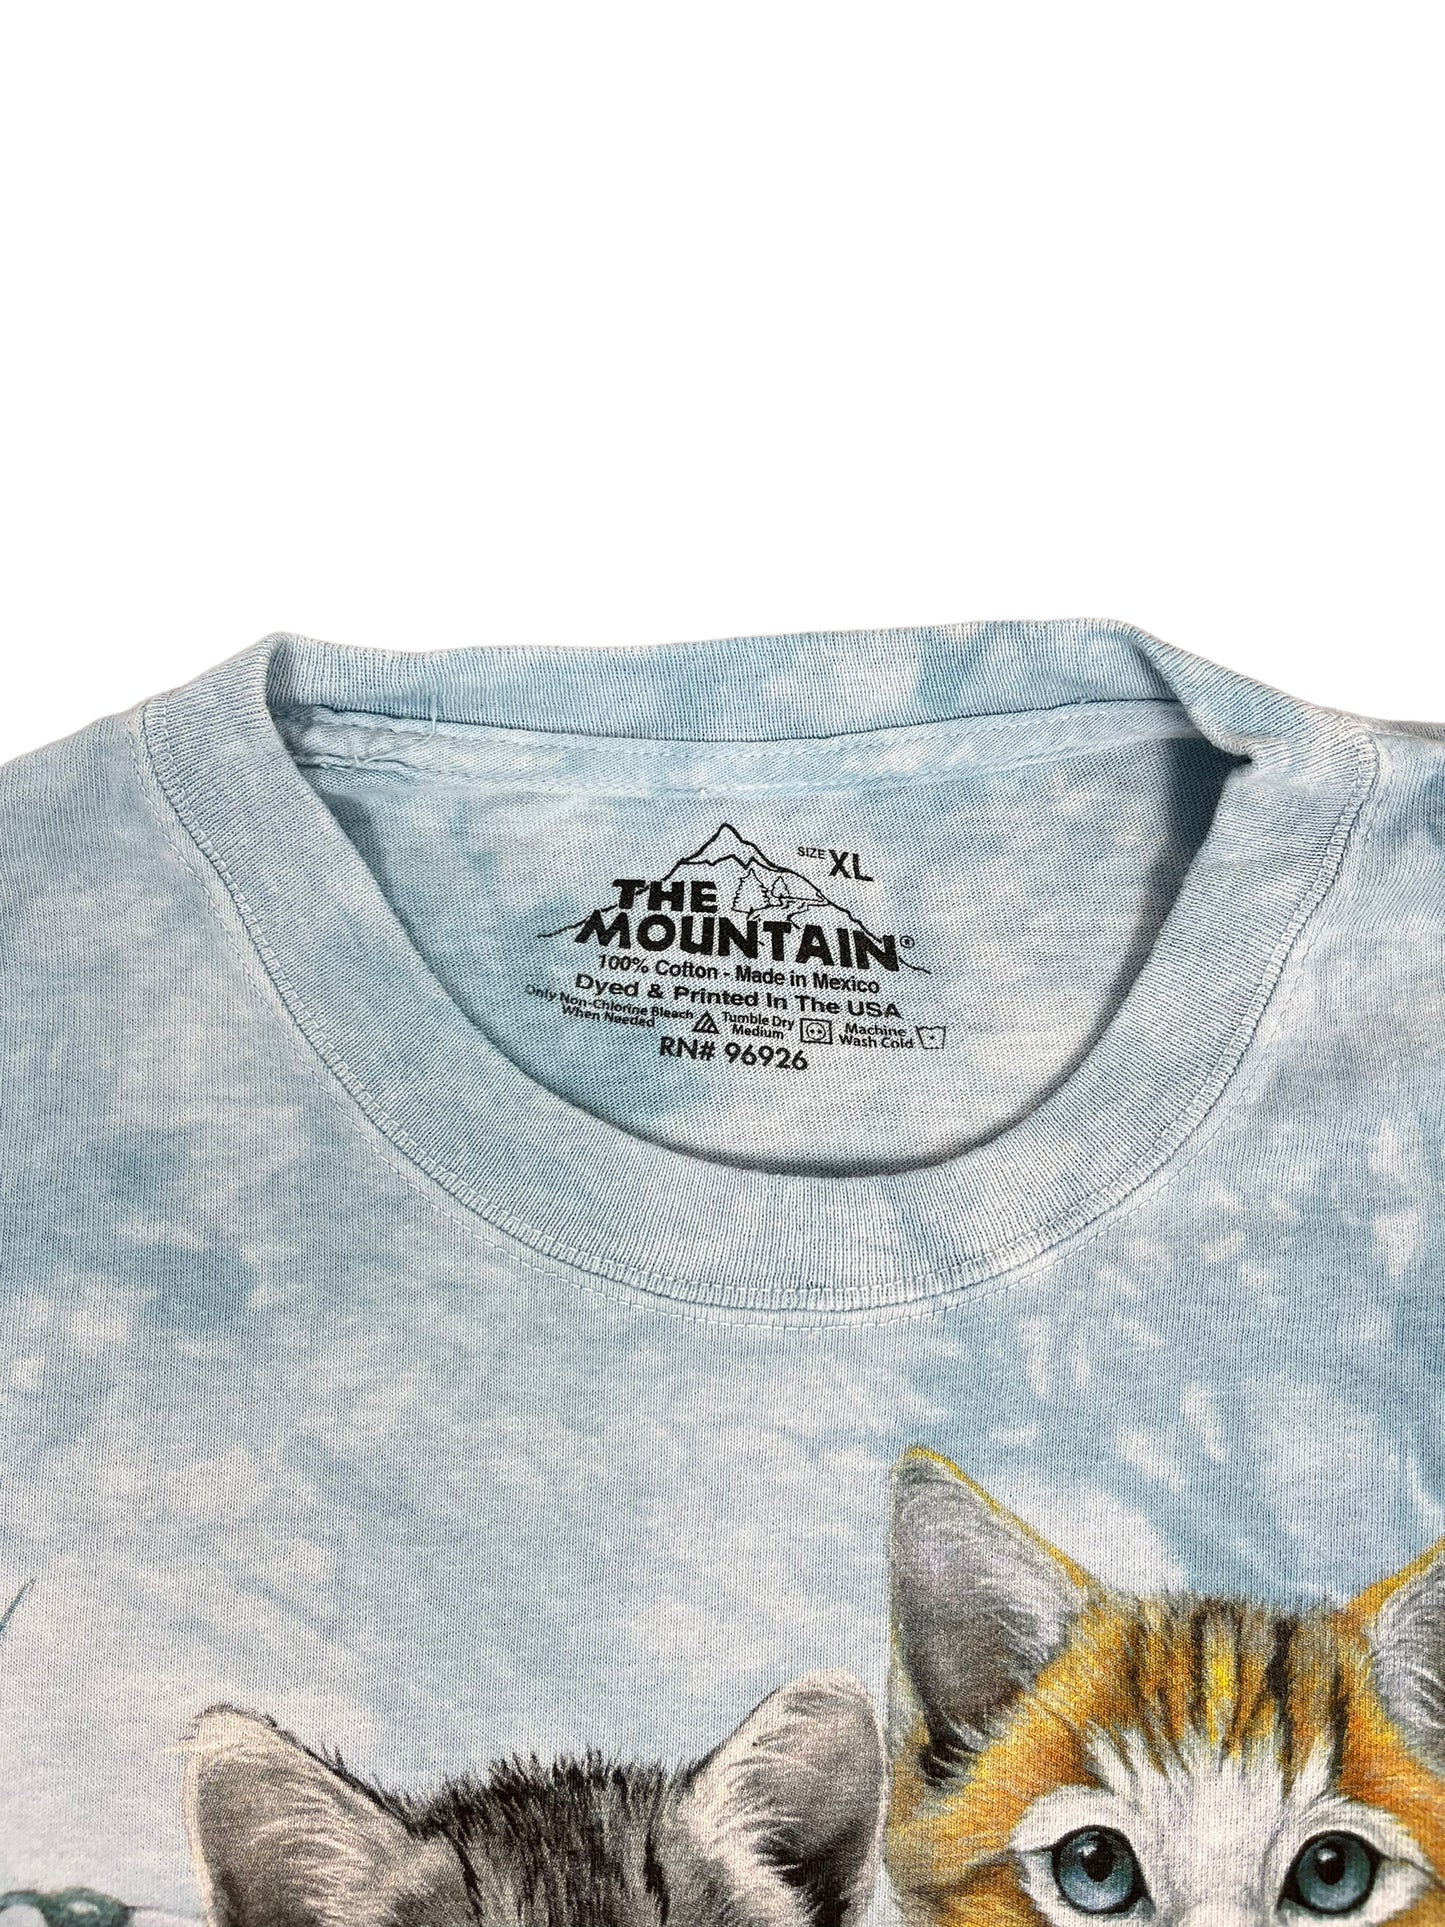 Vintage The Mountain Cats T Shirt - XL